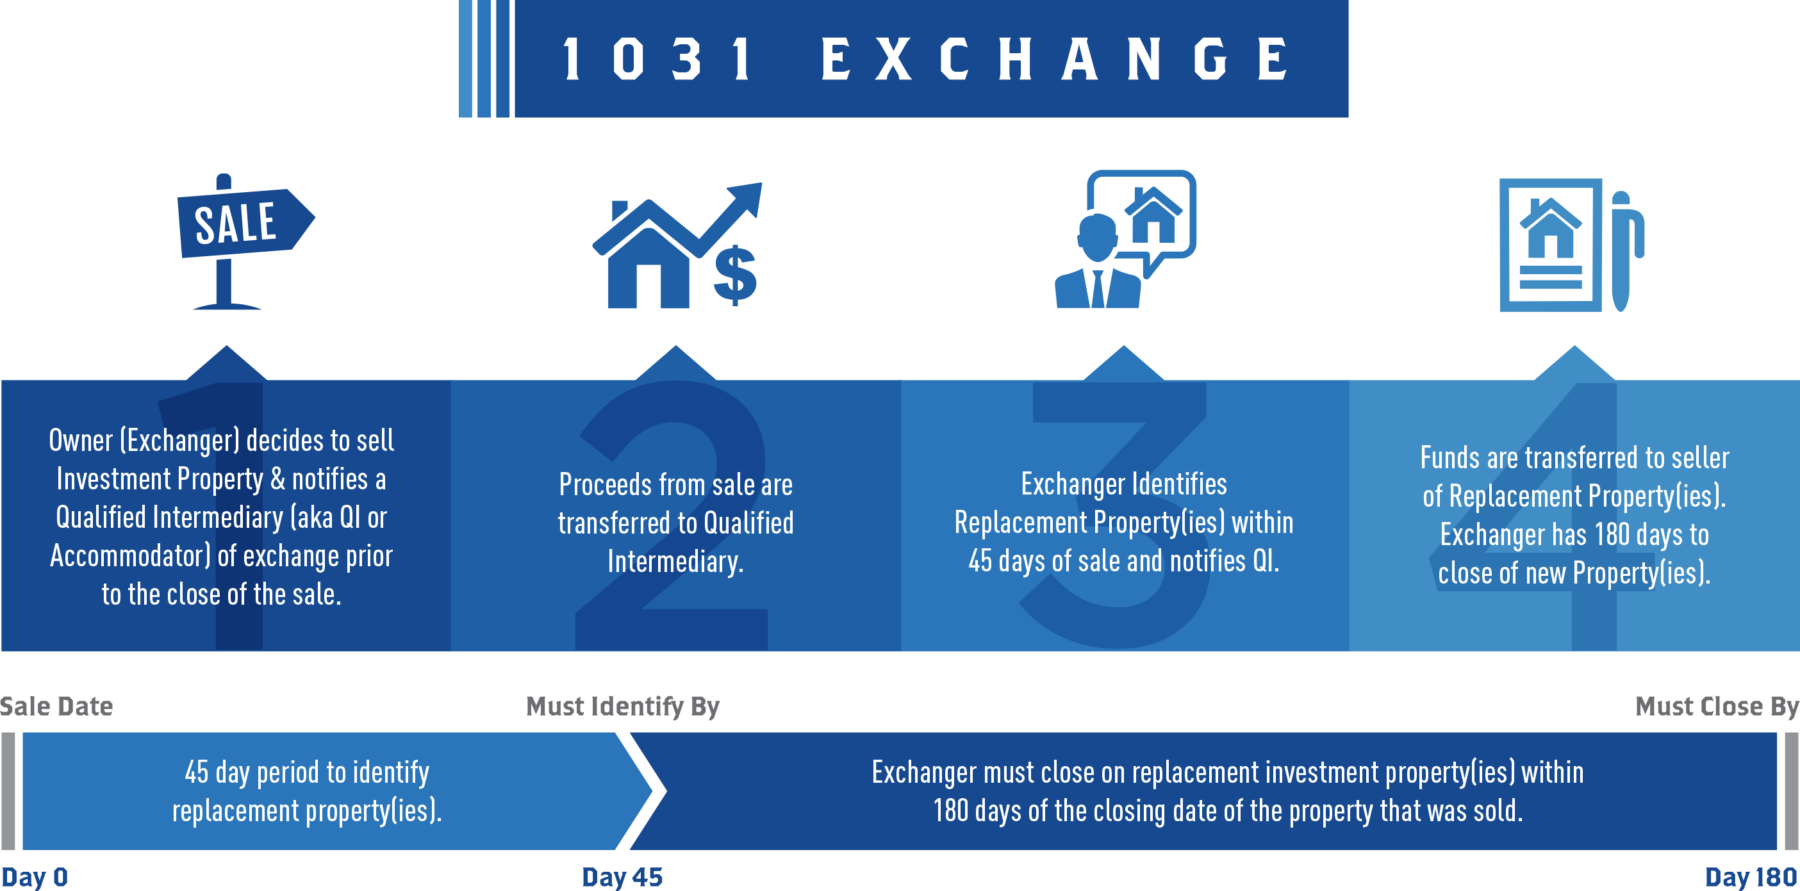 1031 Exchange Rules Tax Reform